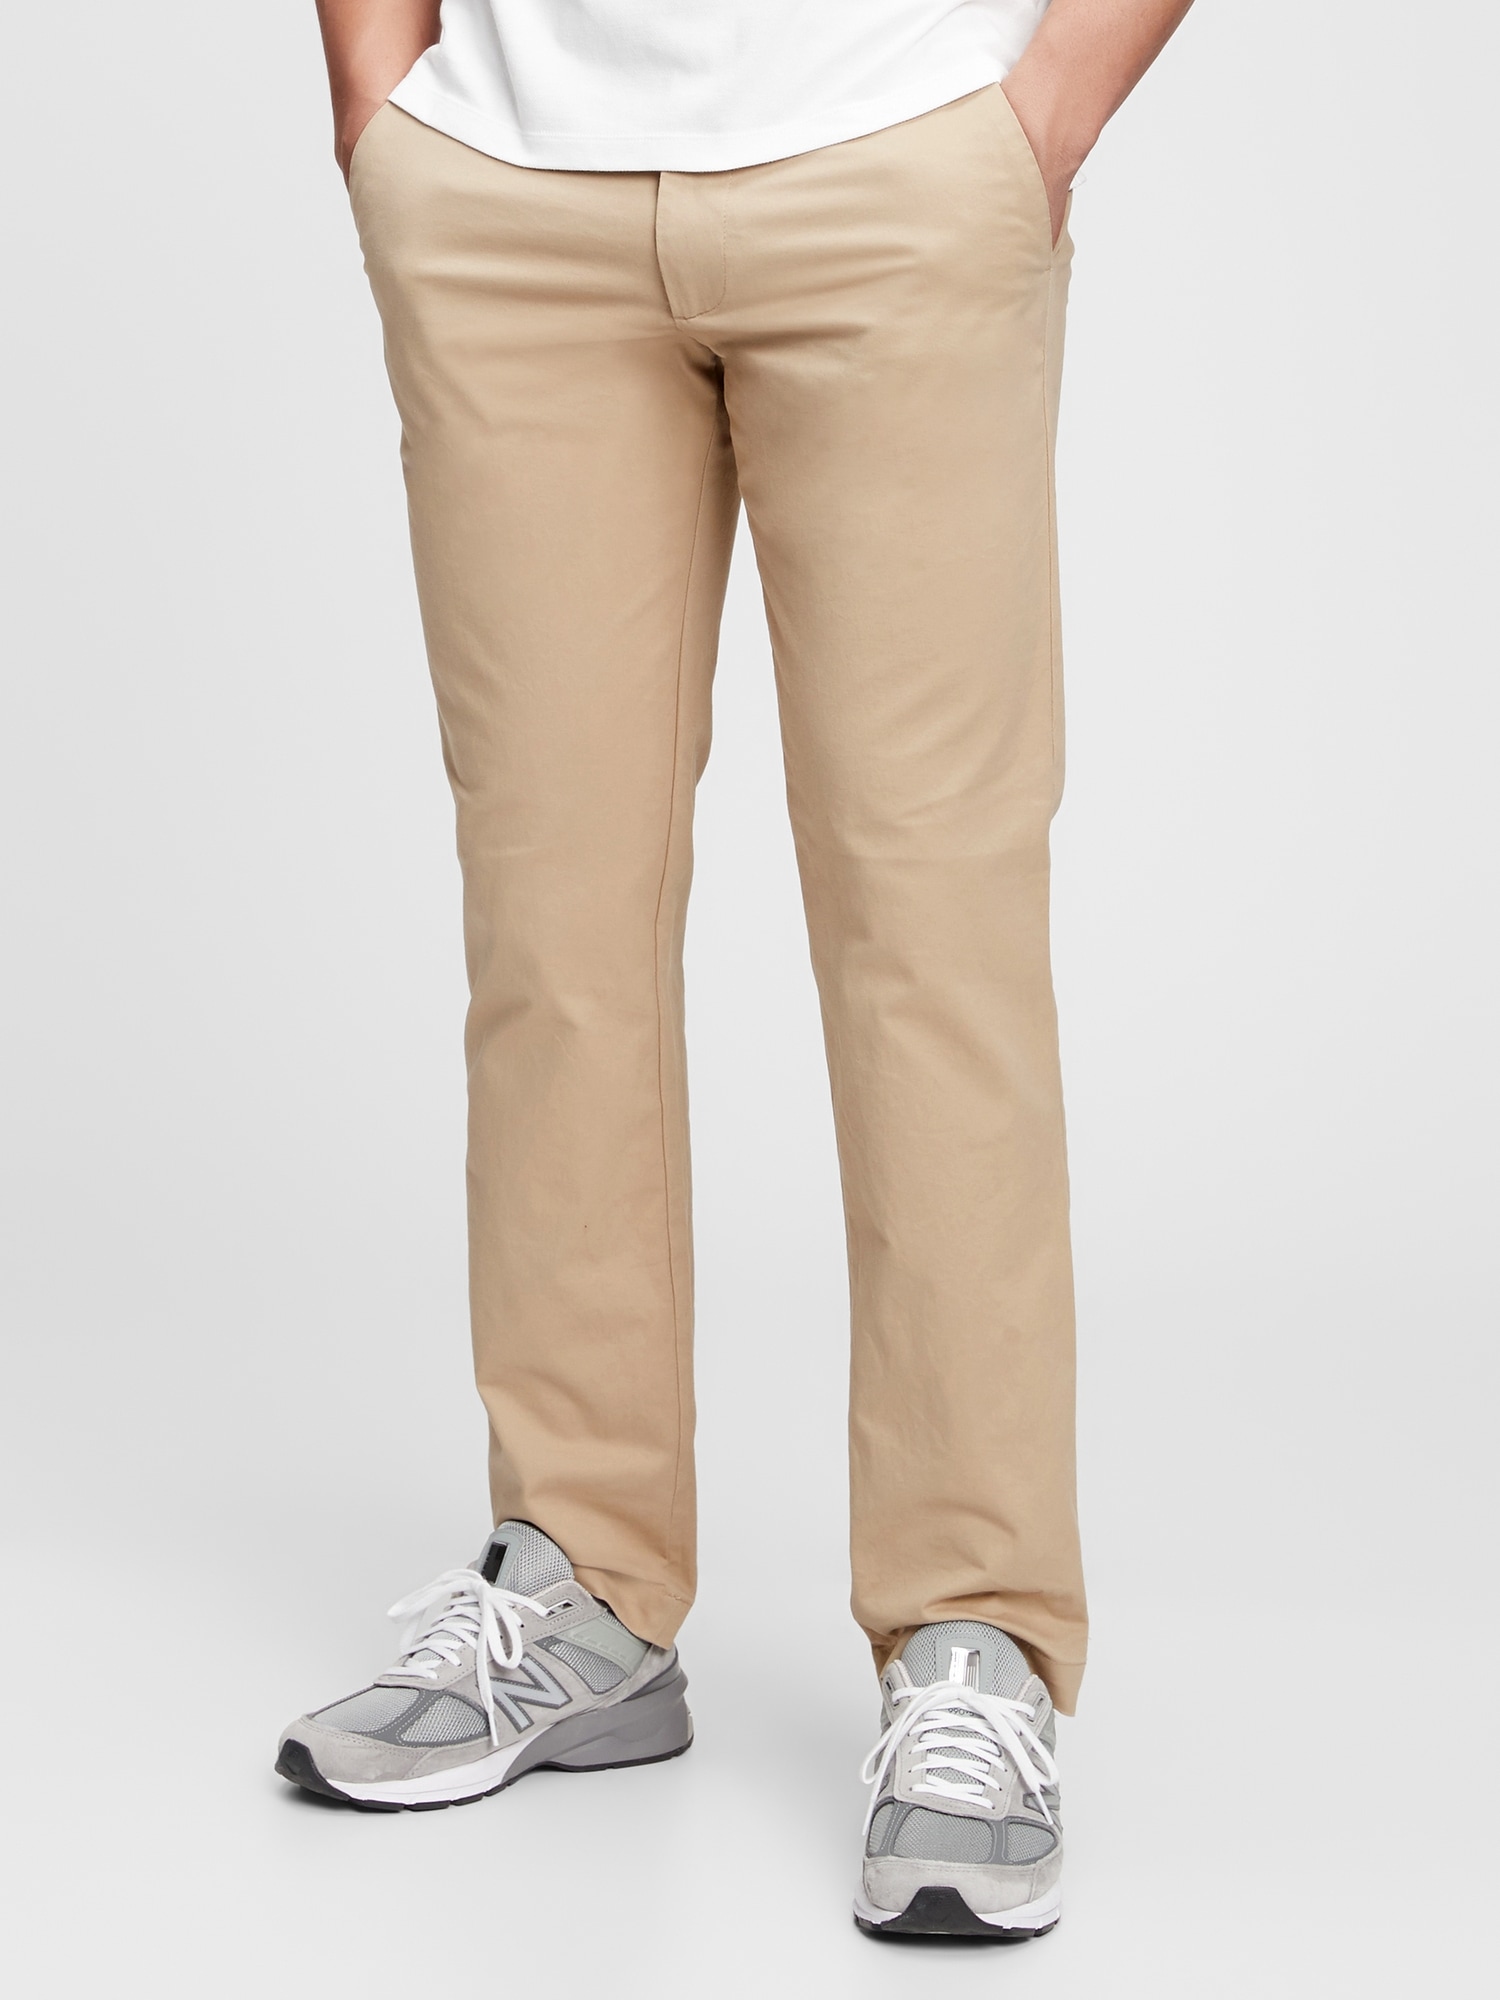 Gap Modern Khakis In Straight Fit With Flex